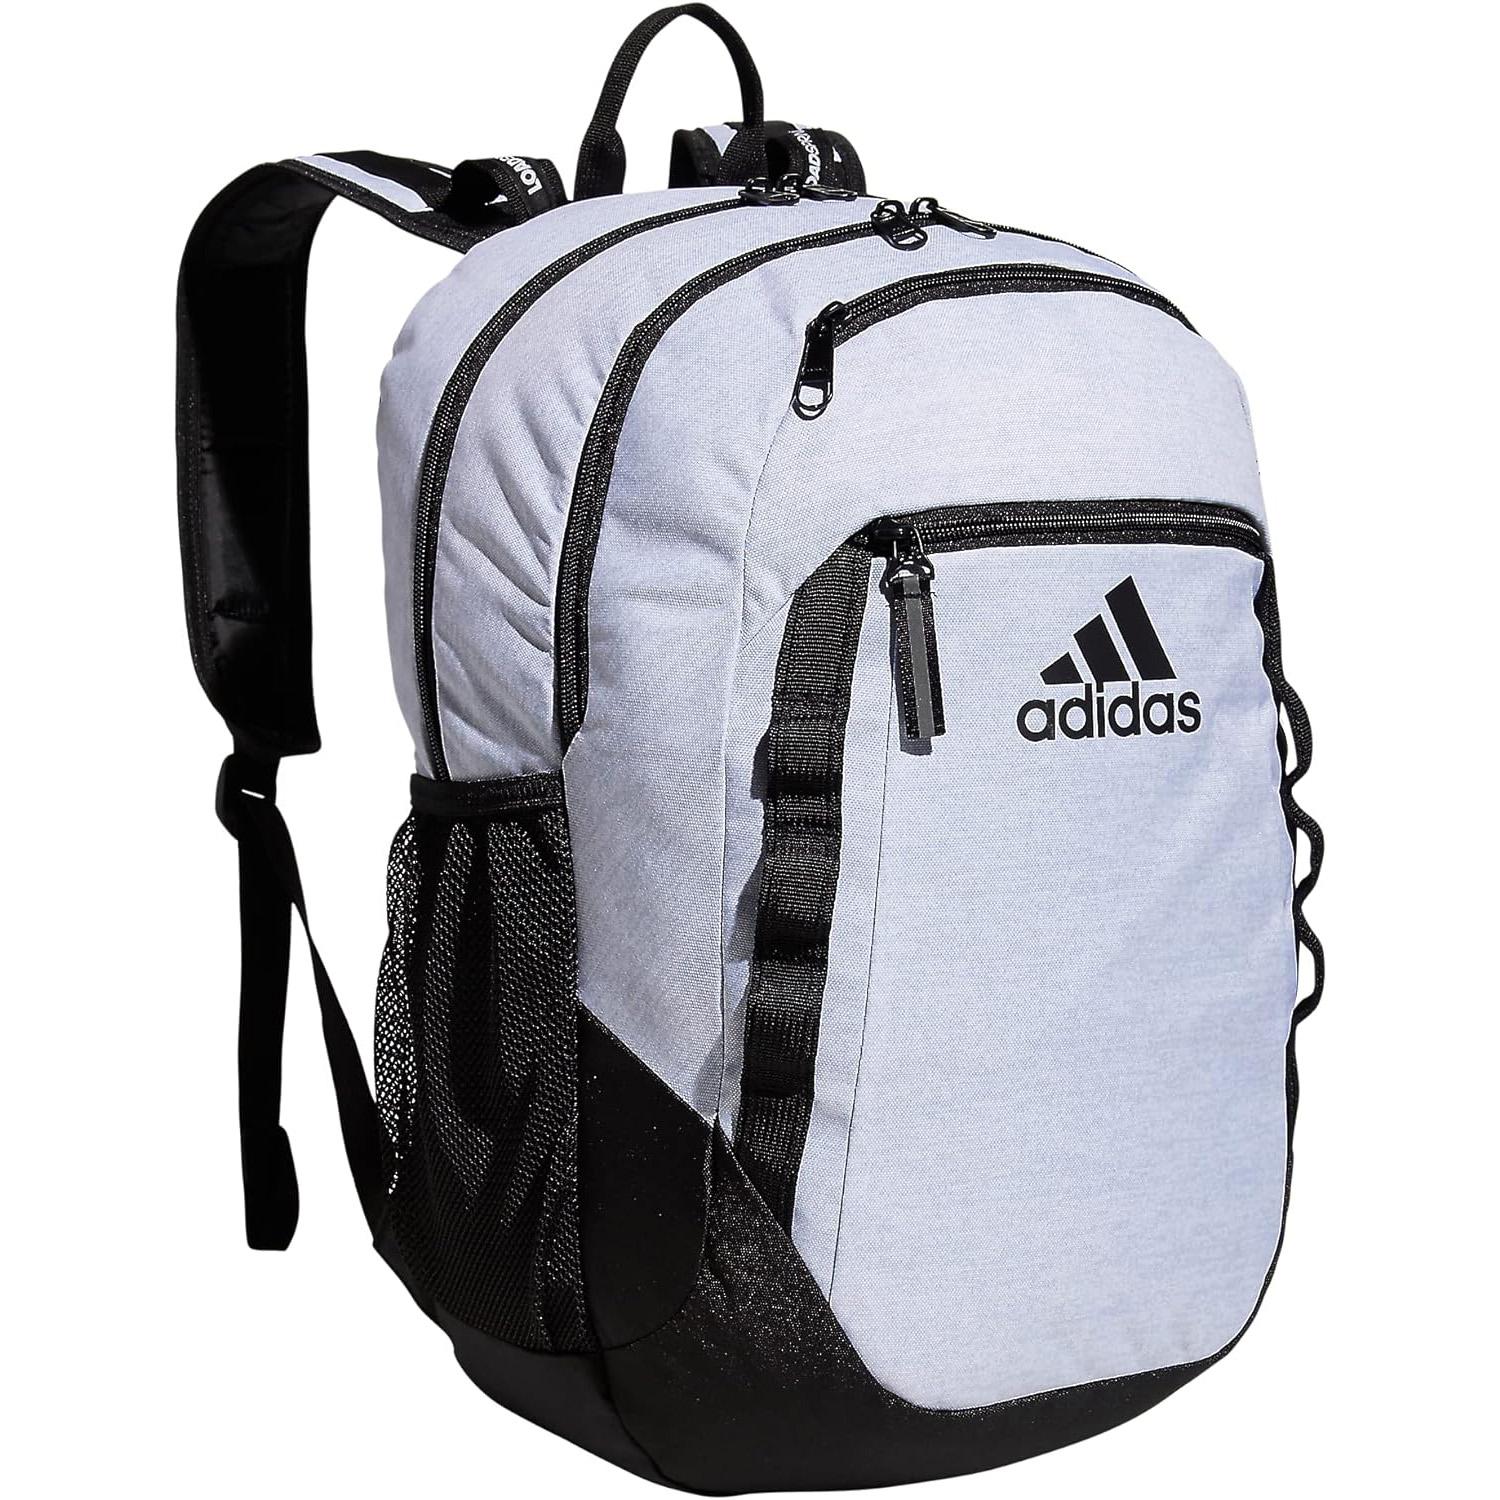 adidas Excel 6 Backpack for $31.81